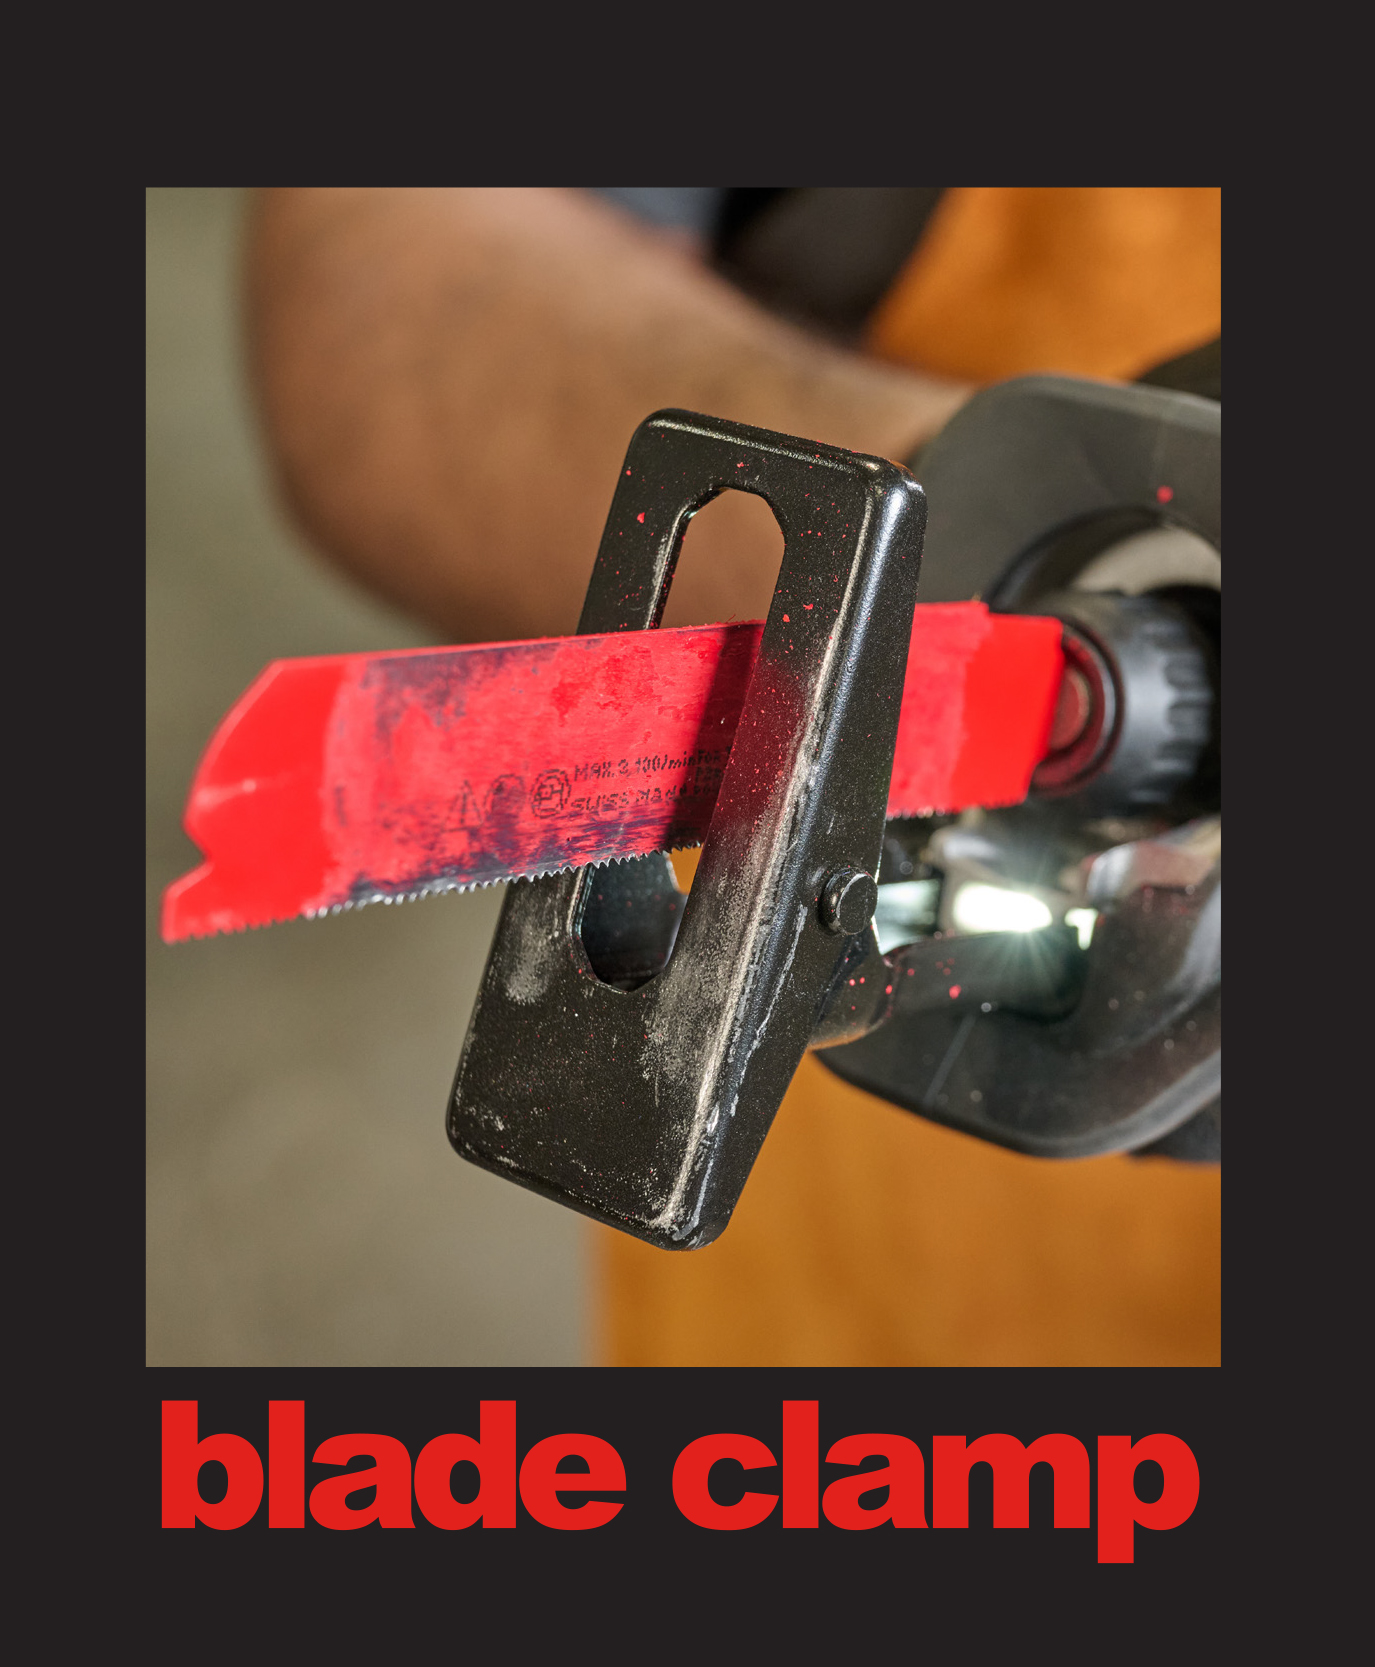 cordless recip saw has a tool-less blade clamp for a quick change of blades.